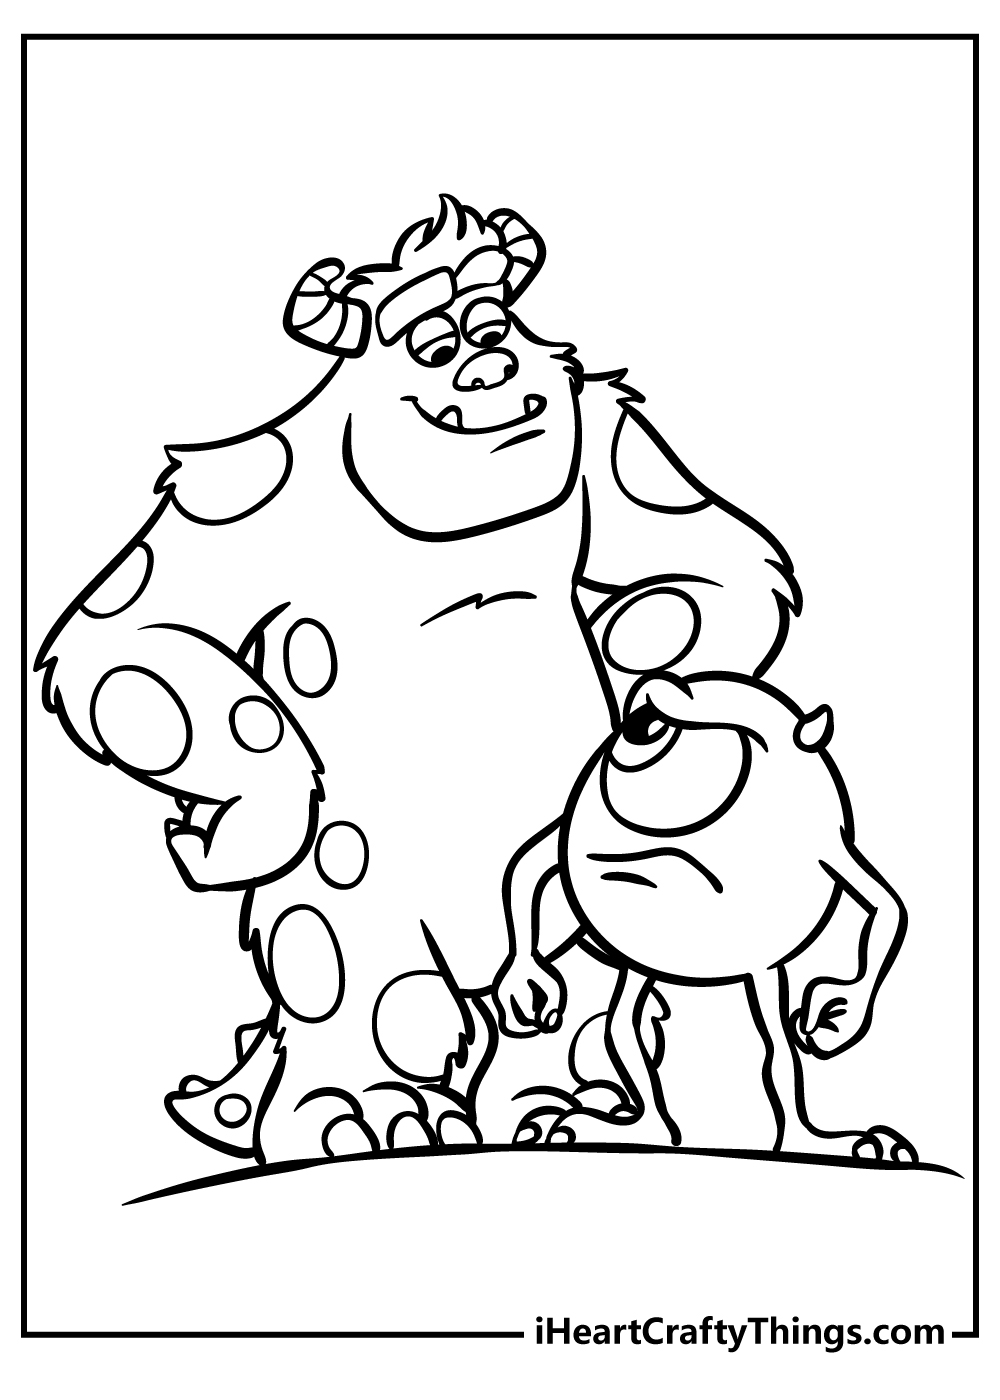 Monsters Inc. Coloring Pages for kids free download